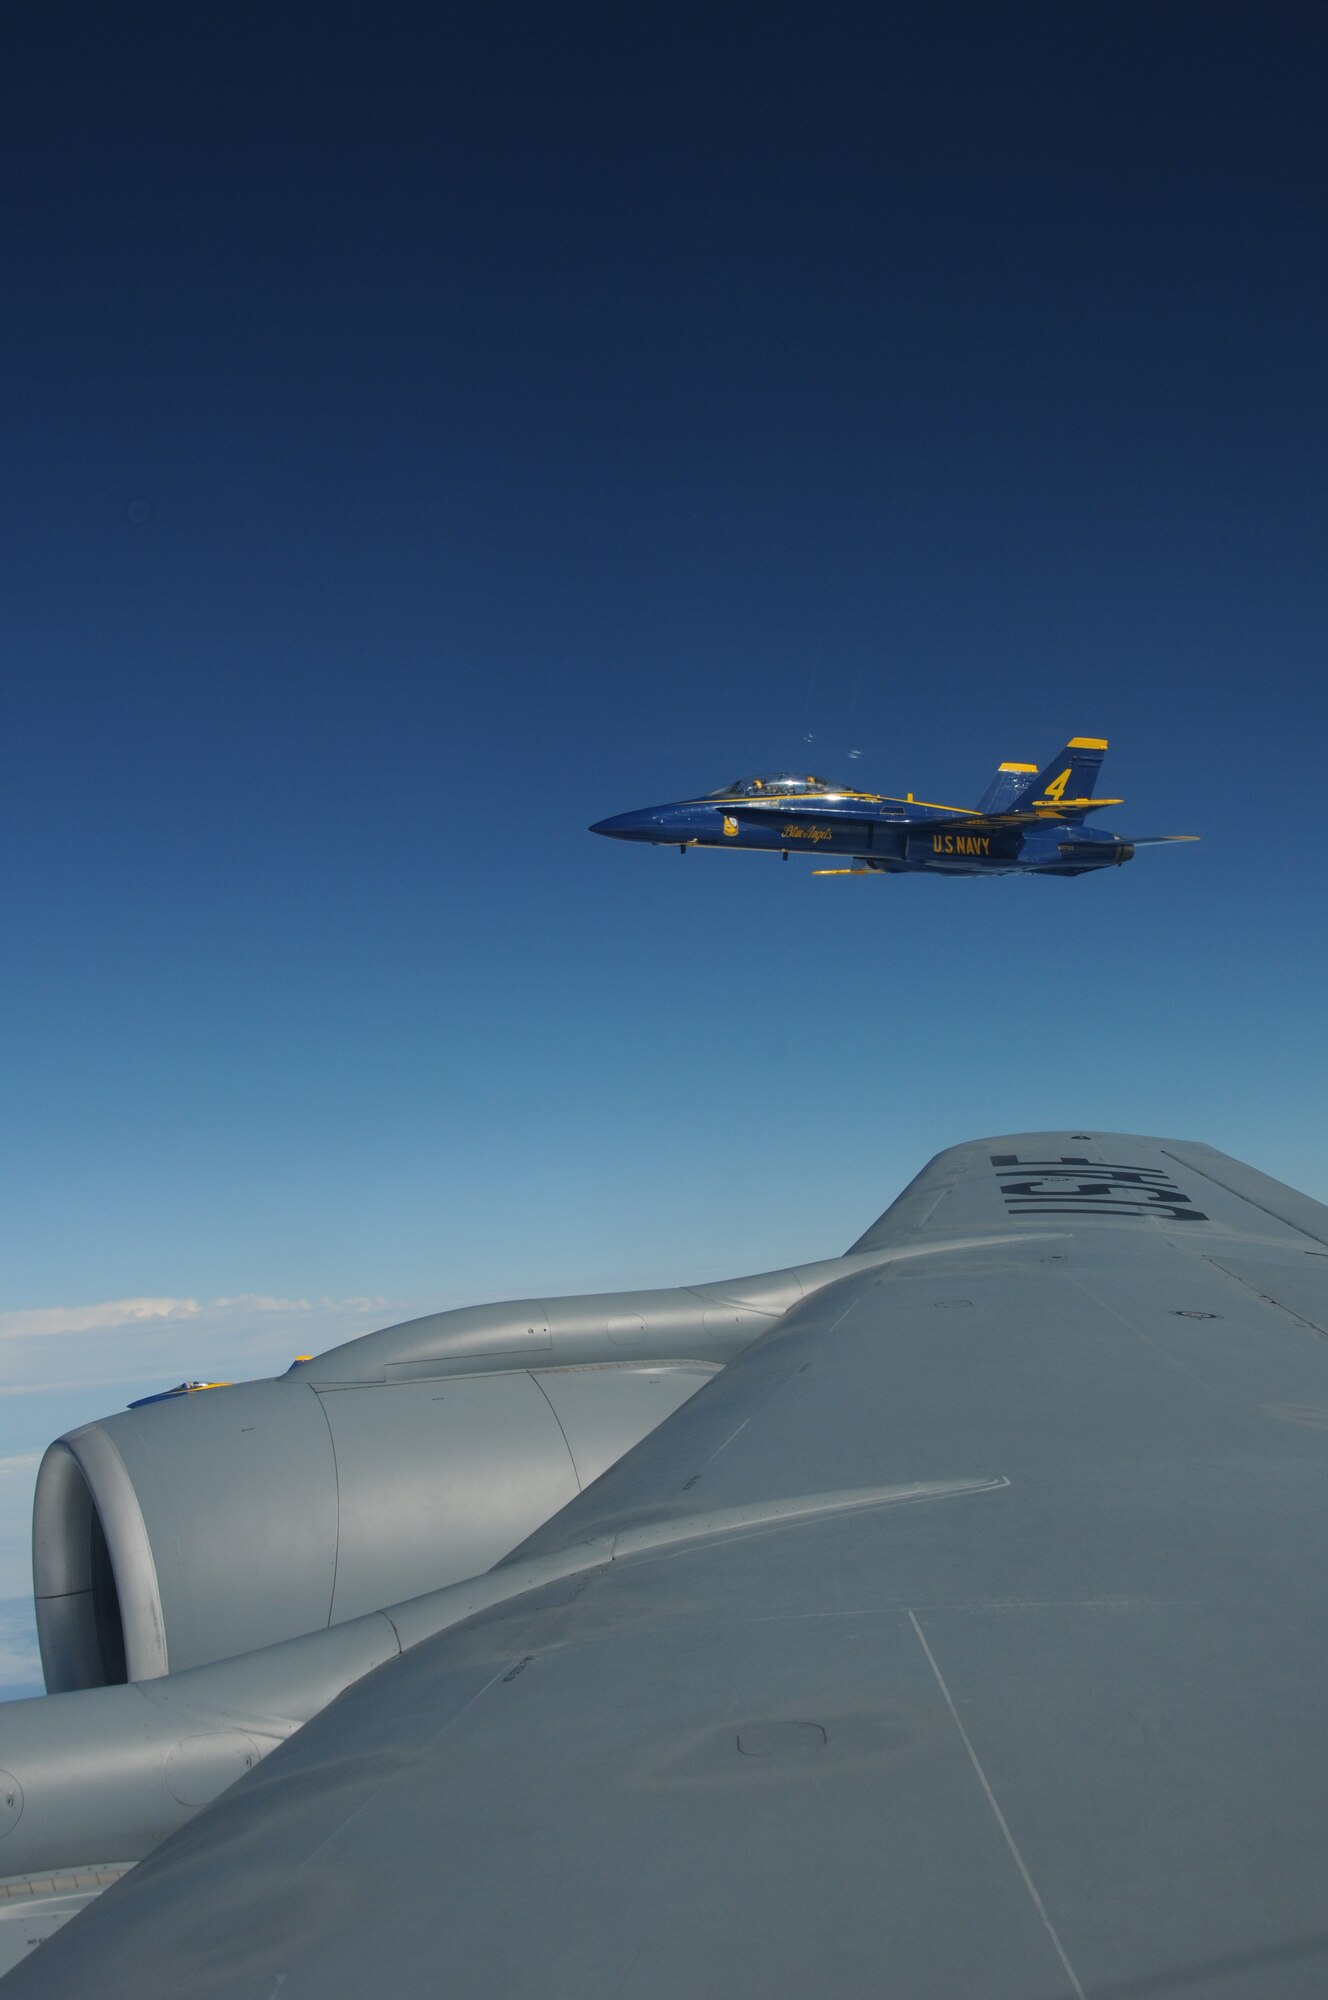 An F/A-18 Hornet belonging to the United States Navy's Flight Demonstration Squadron, the Blue Angels, forms up on the wing of a KC-135R Stratotanker over the Eastern United States on August 25, 2010. The tanker aircraft and crew are from the 157th Air Refueling Wing at Pease Air National Guard Guard Base, New Hampshire. The Blue Angels are headed to the 2010 Boston New-England Airshow  at Pease International Airport on August 28th-29th 2010. Although the NH Air National Guard won't be hosting the airshow, they will be providing logistical support to the Blue Angels and other military aircraft. (U.S. Air Force photo/Staff Sgt. Curtis J. Lenz)